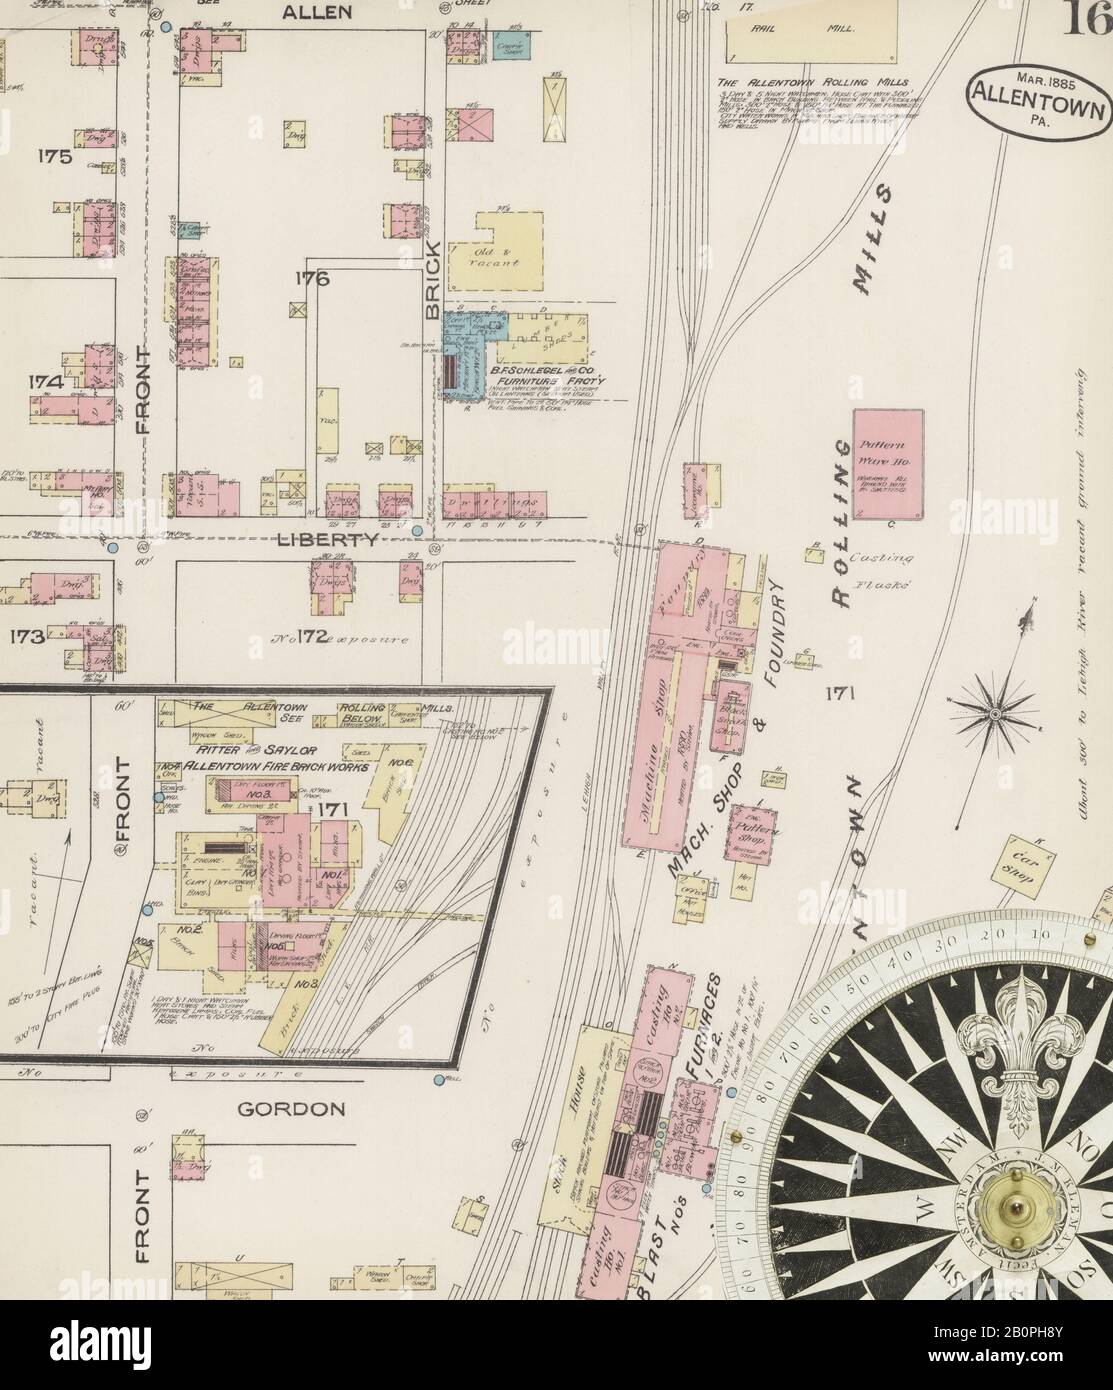 Image 16 of Sanborn Fire Insurance Map from Allentown, Lehigh County, Pennsylvania. Mar 1885. 25 Sheet(s), America, street map with a Nineteenth Century compass Stock Photo